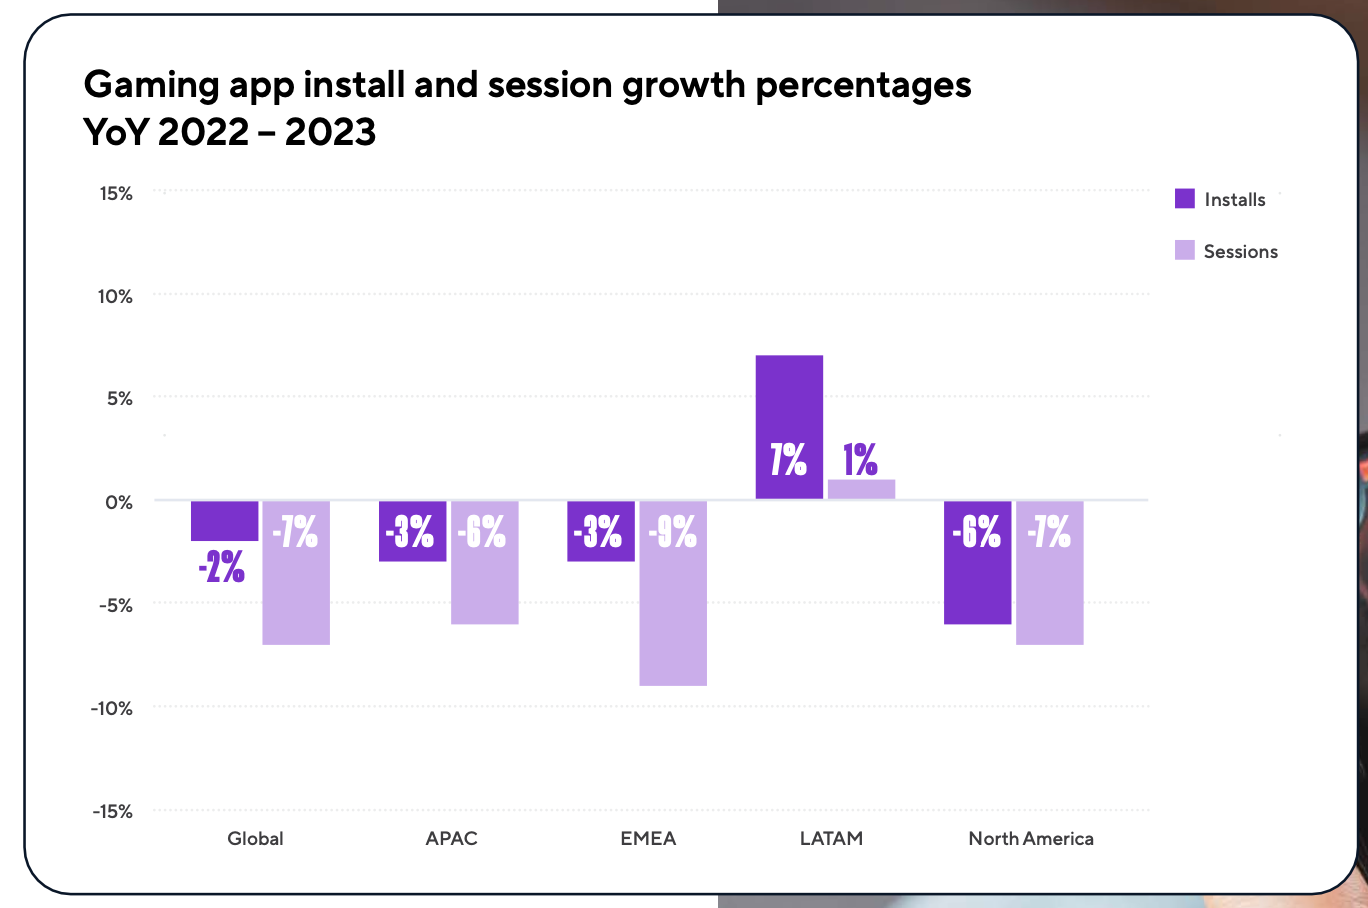 Gaming app install and session growth percentages